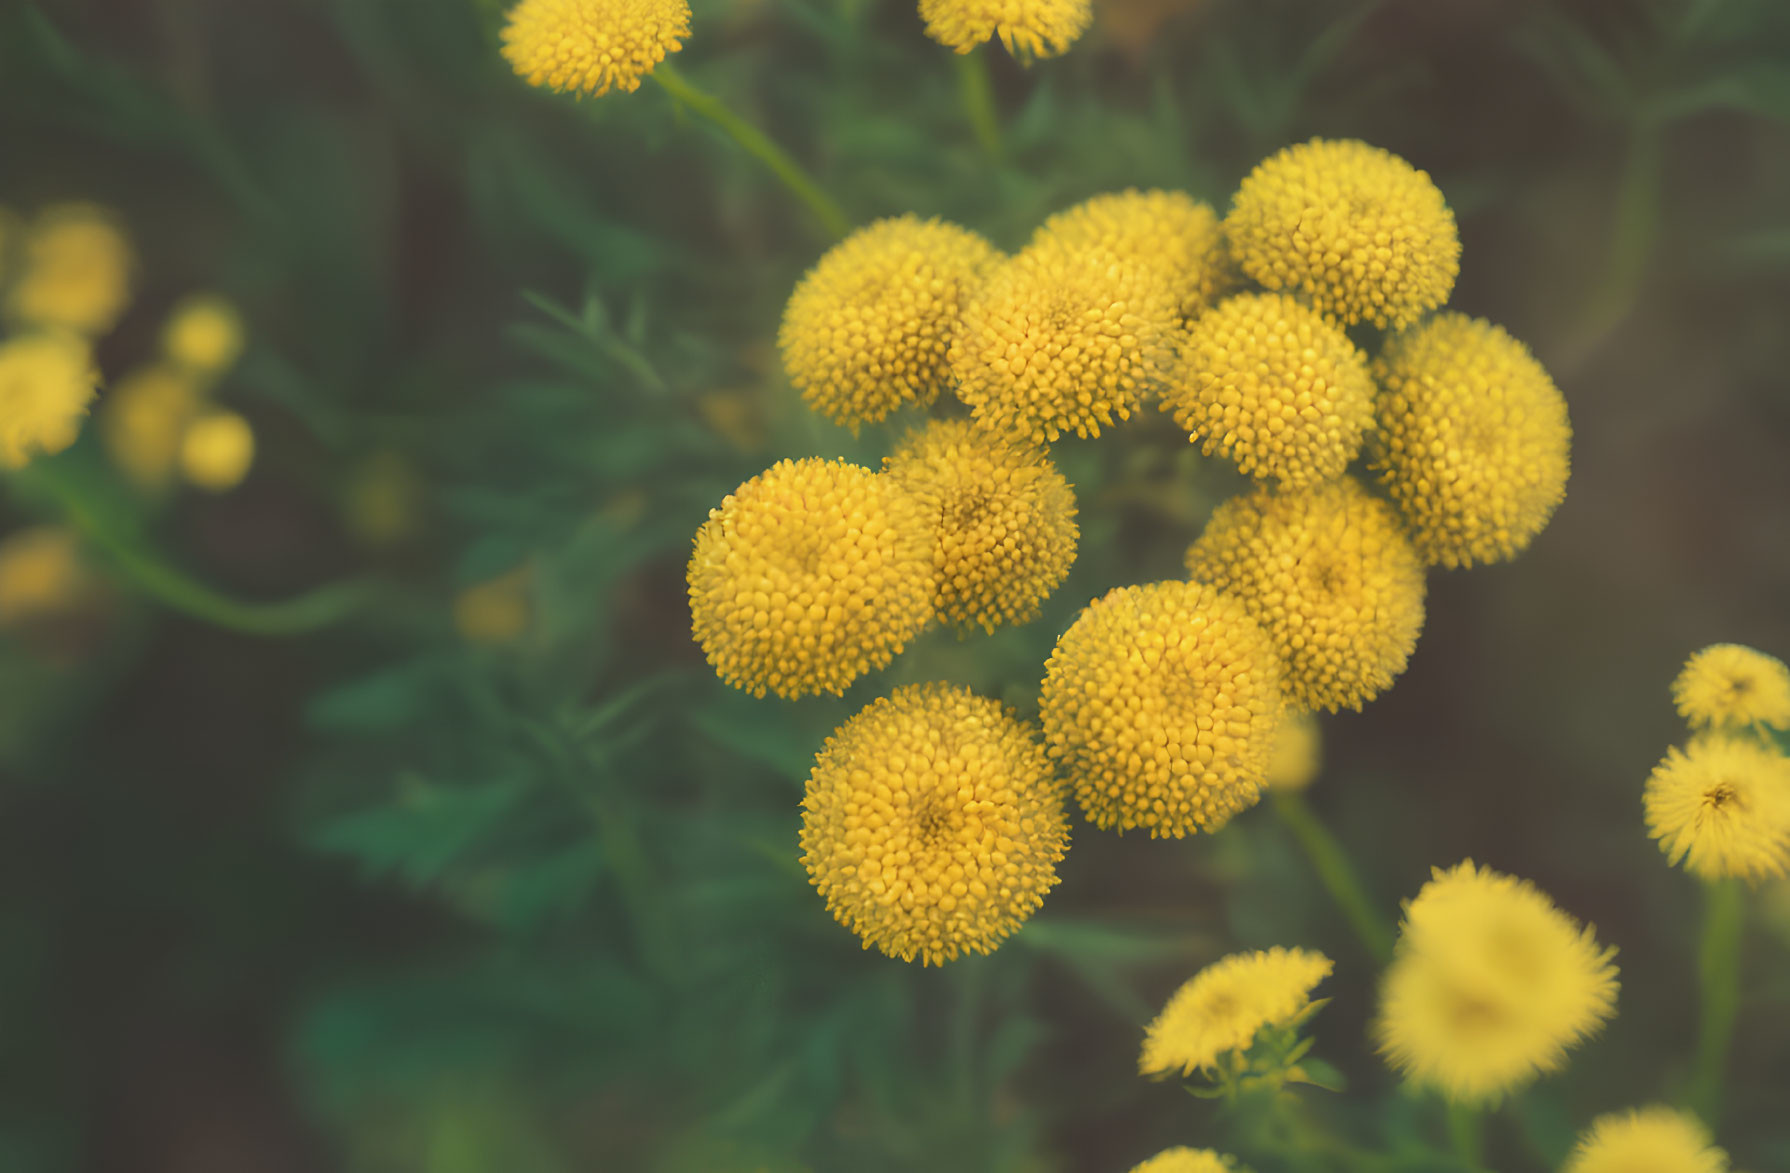 Yellow Button-Like Flowers with Soft-Focus Green Leaves